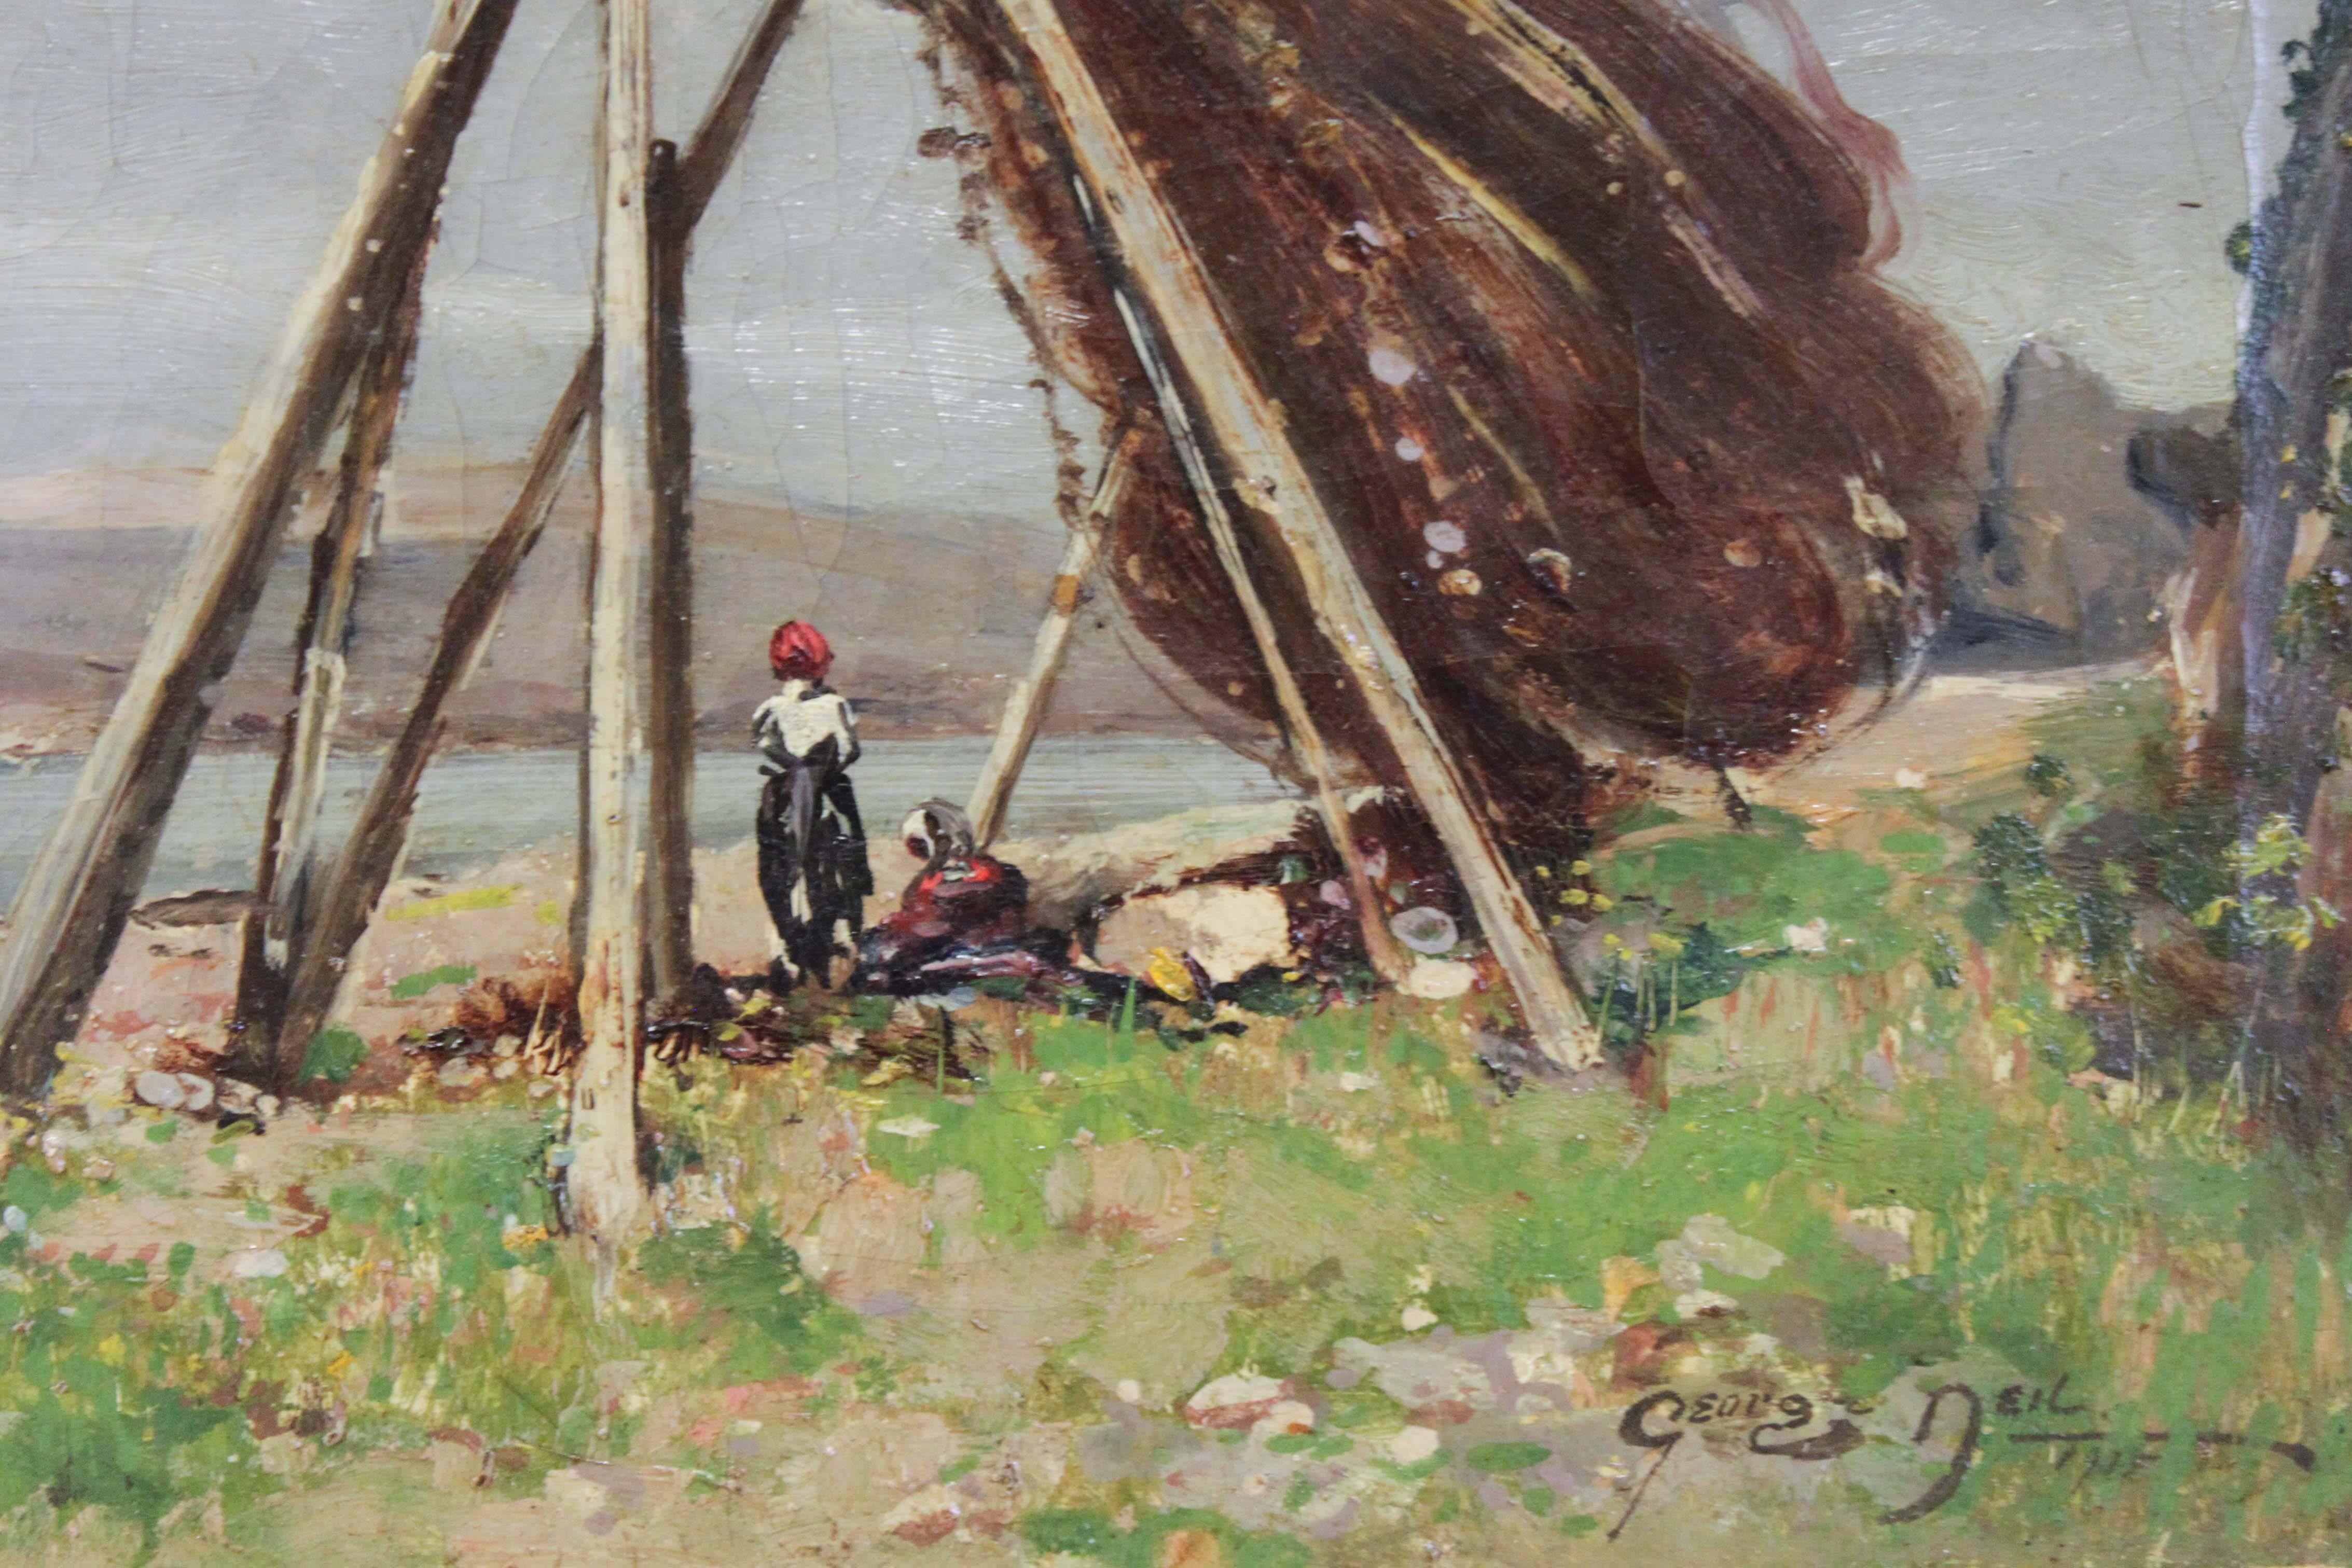 ‘Fisherman drying their Nets’ by George Neil. A fine painting depicting fishermen drying their nets on a rare sunny day in Scotland. George Neil exhibited at the Glasgow Institute. Signed and dated lower right, 1915.